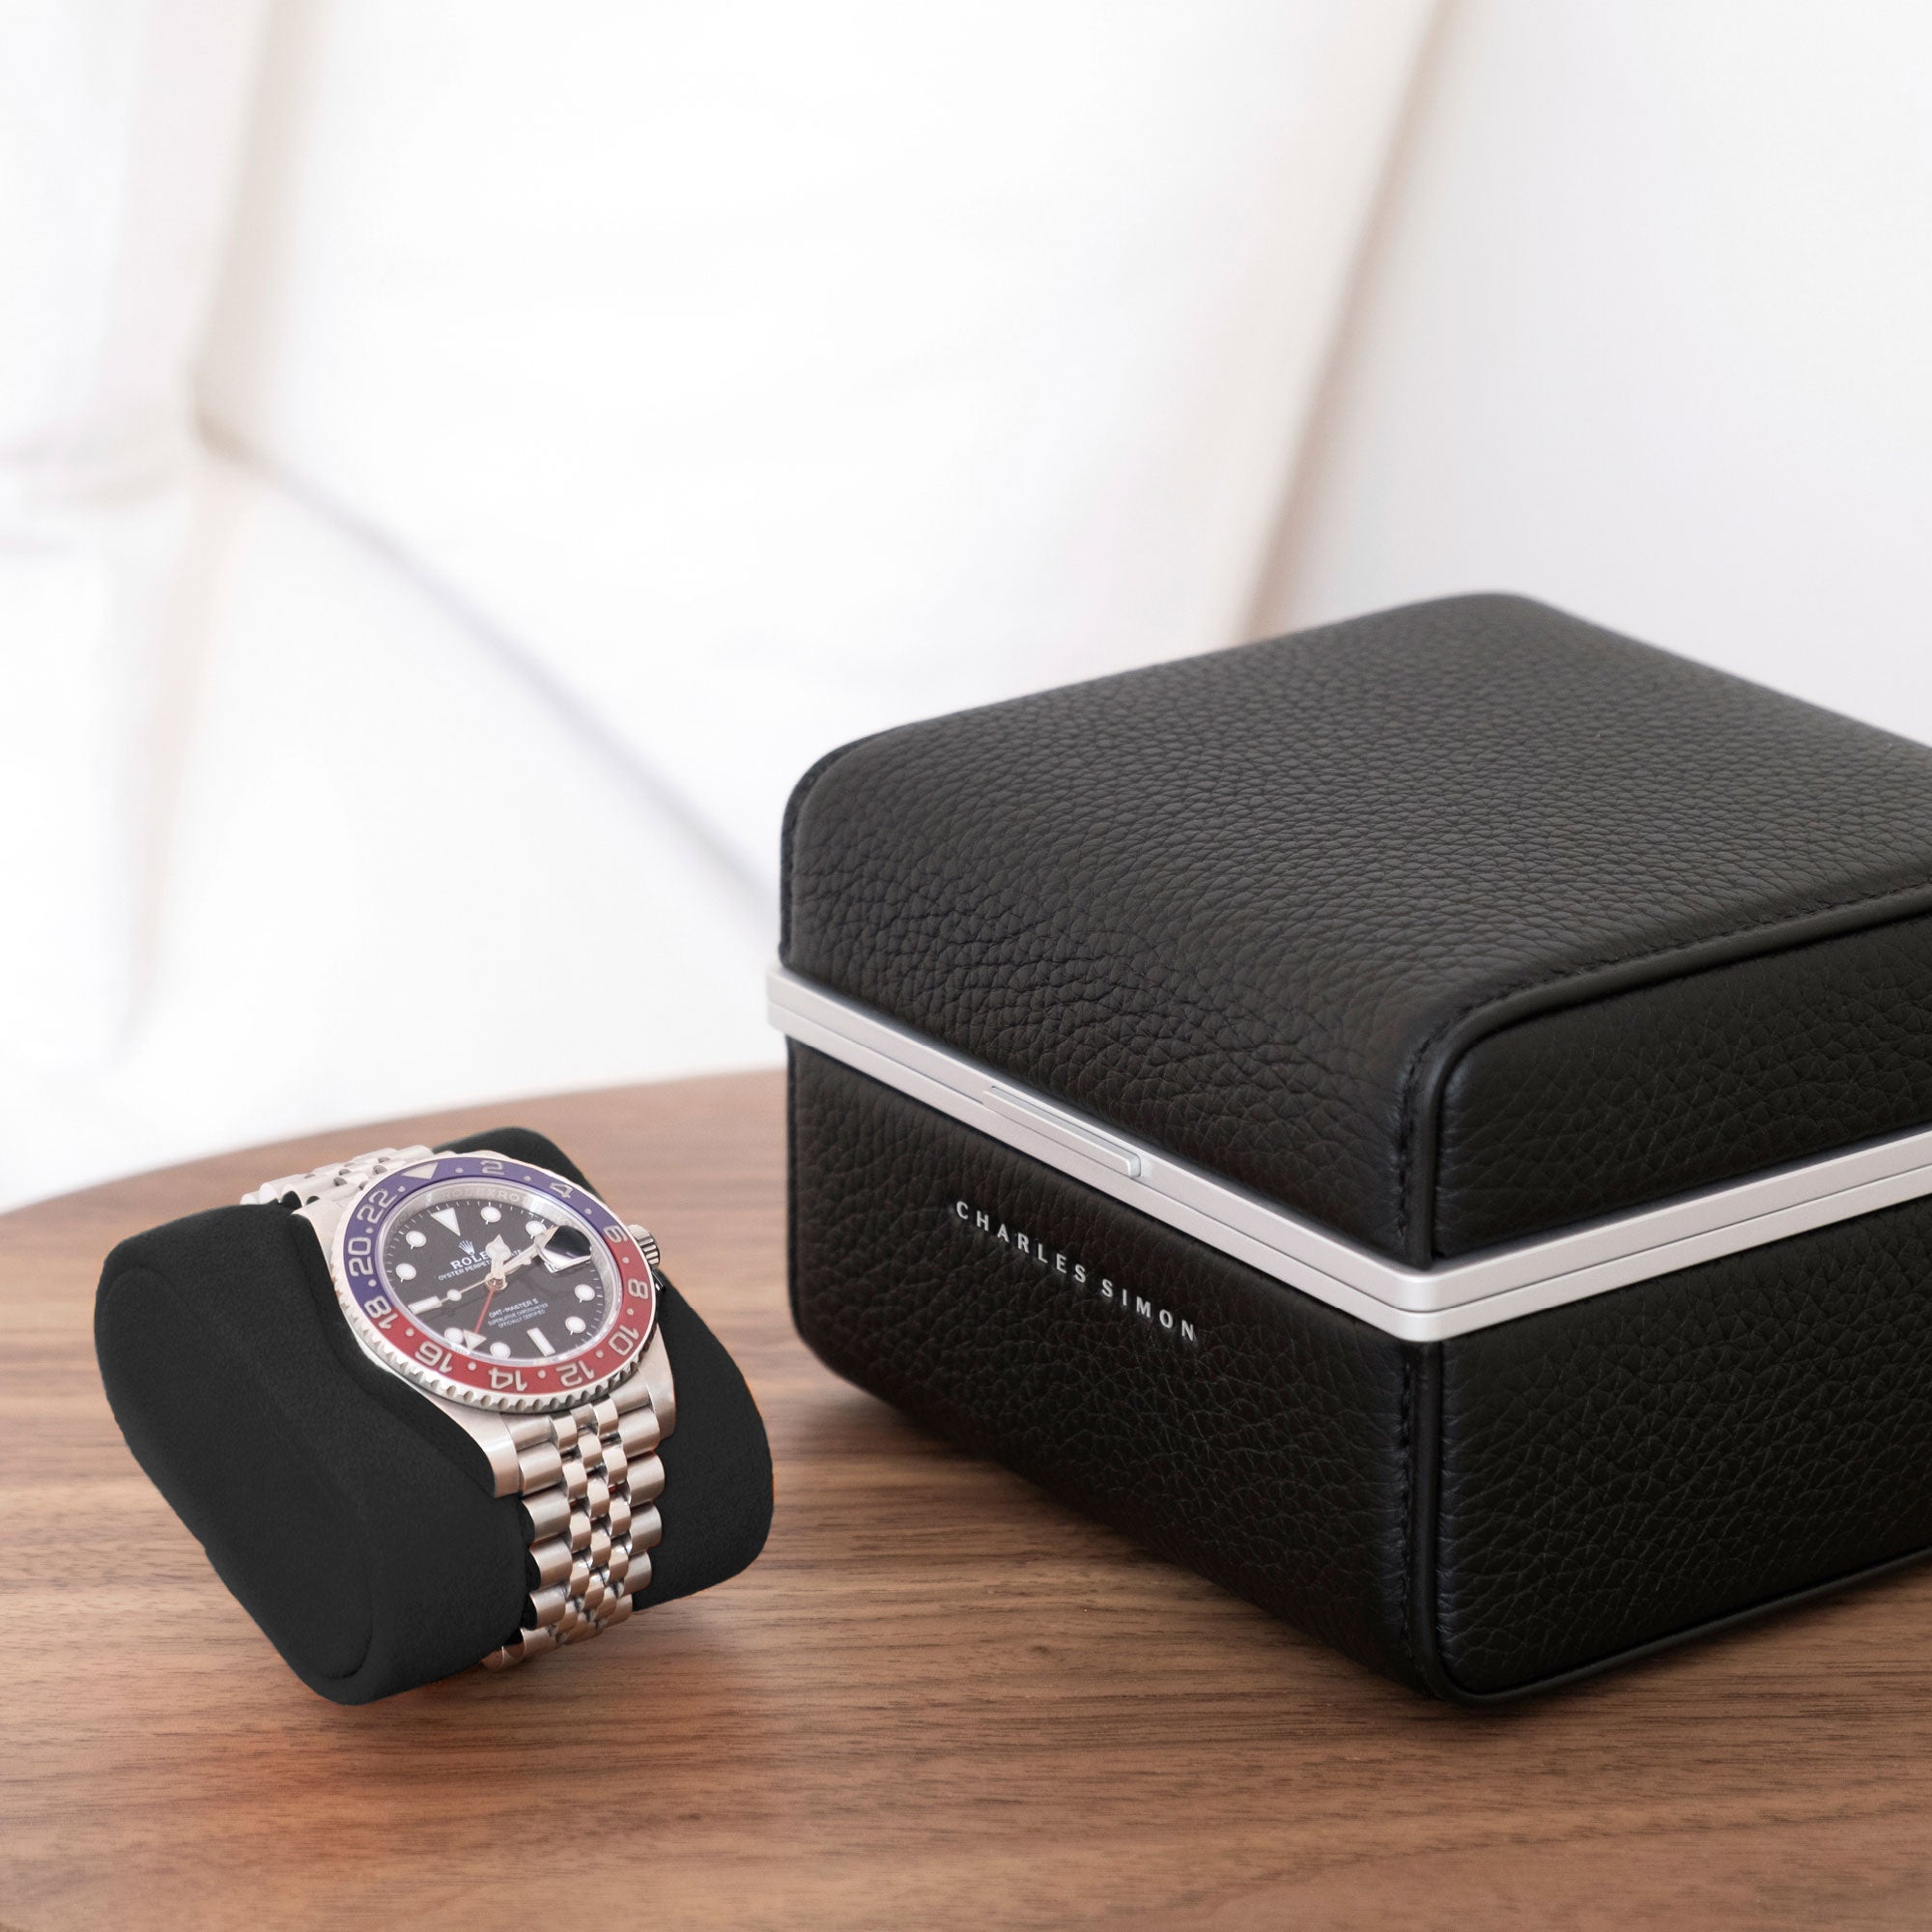 Lifestyle photo of Rolex watch placed on Alcantara cushion next to closed Eaton 1 watch case in black leather and grey anodized aluminum